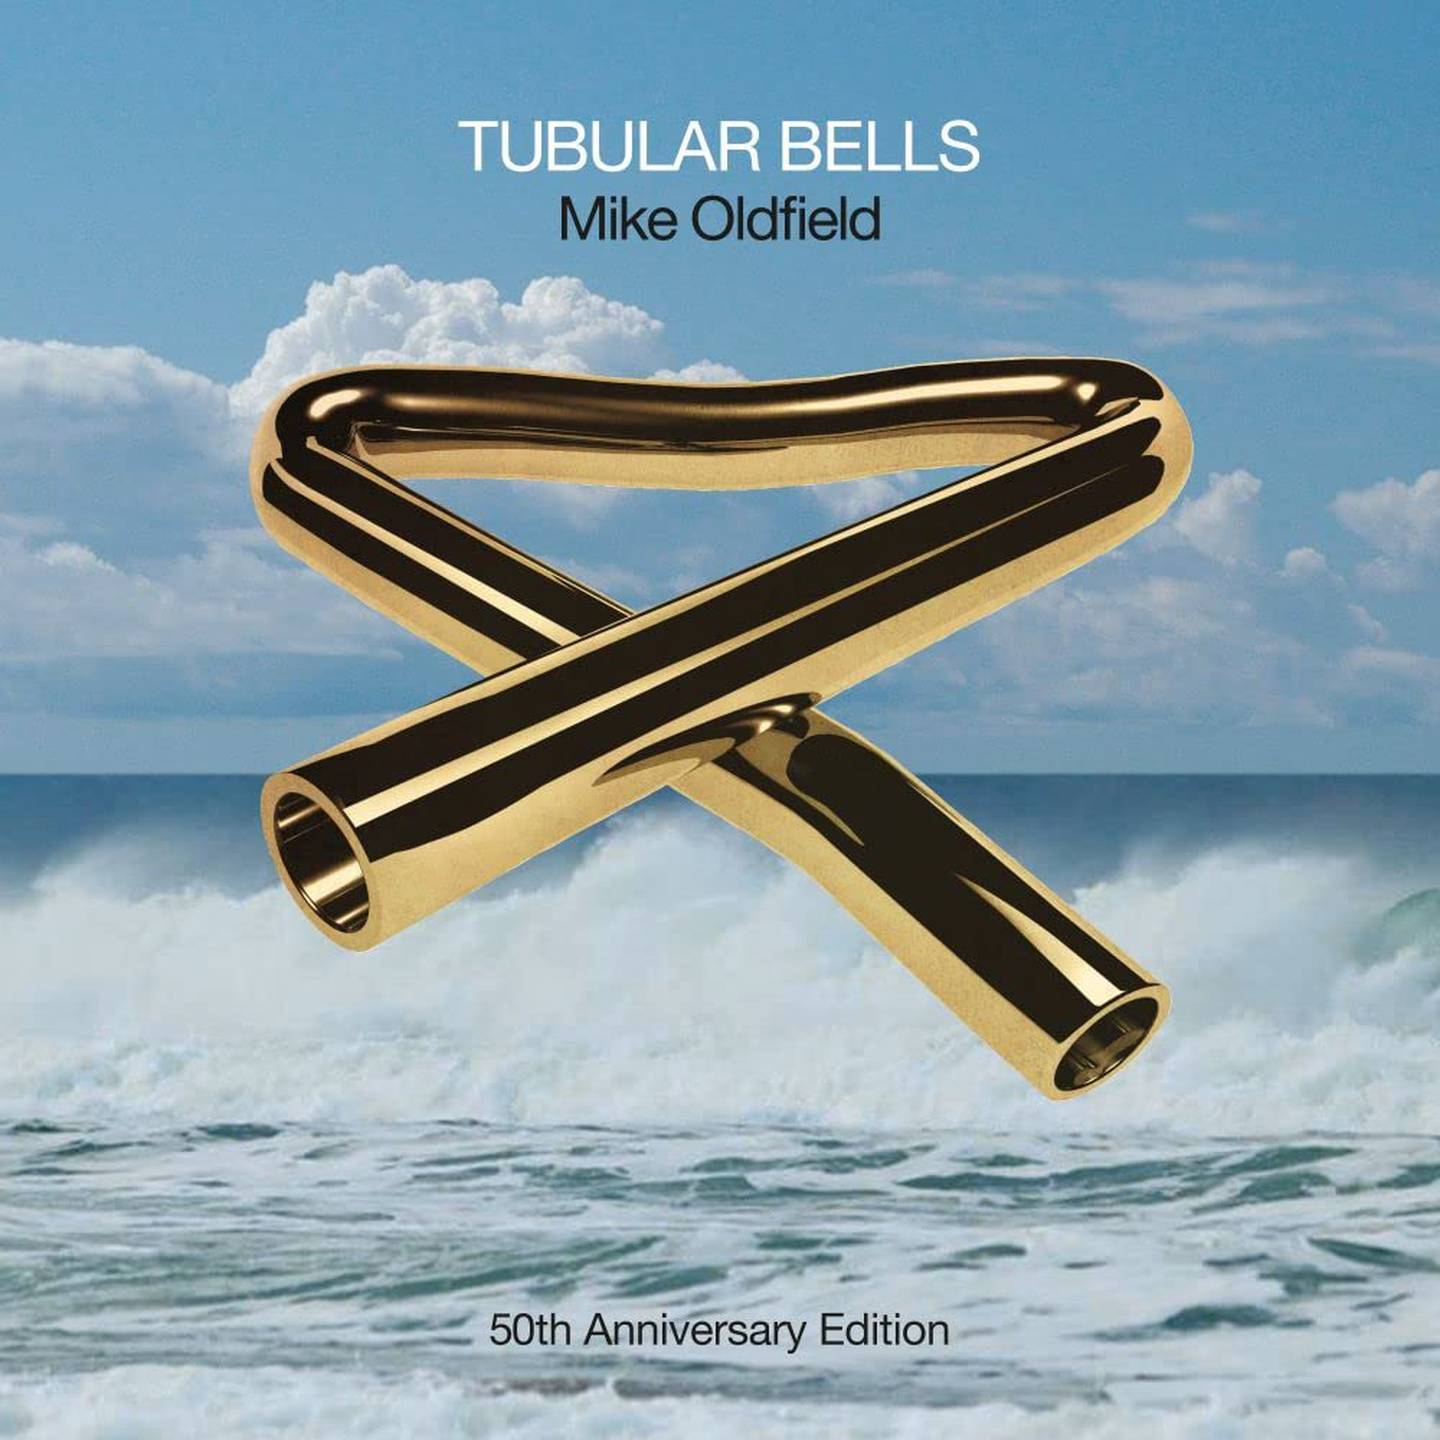 Mike Oldfield: Tubular Bells 50th Anniversary Edition